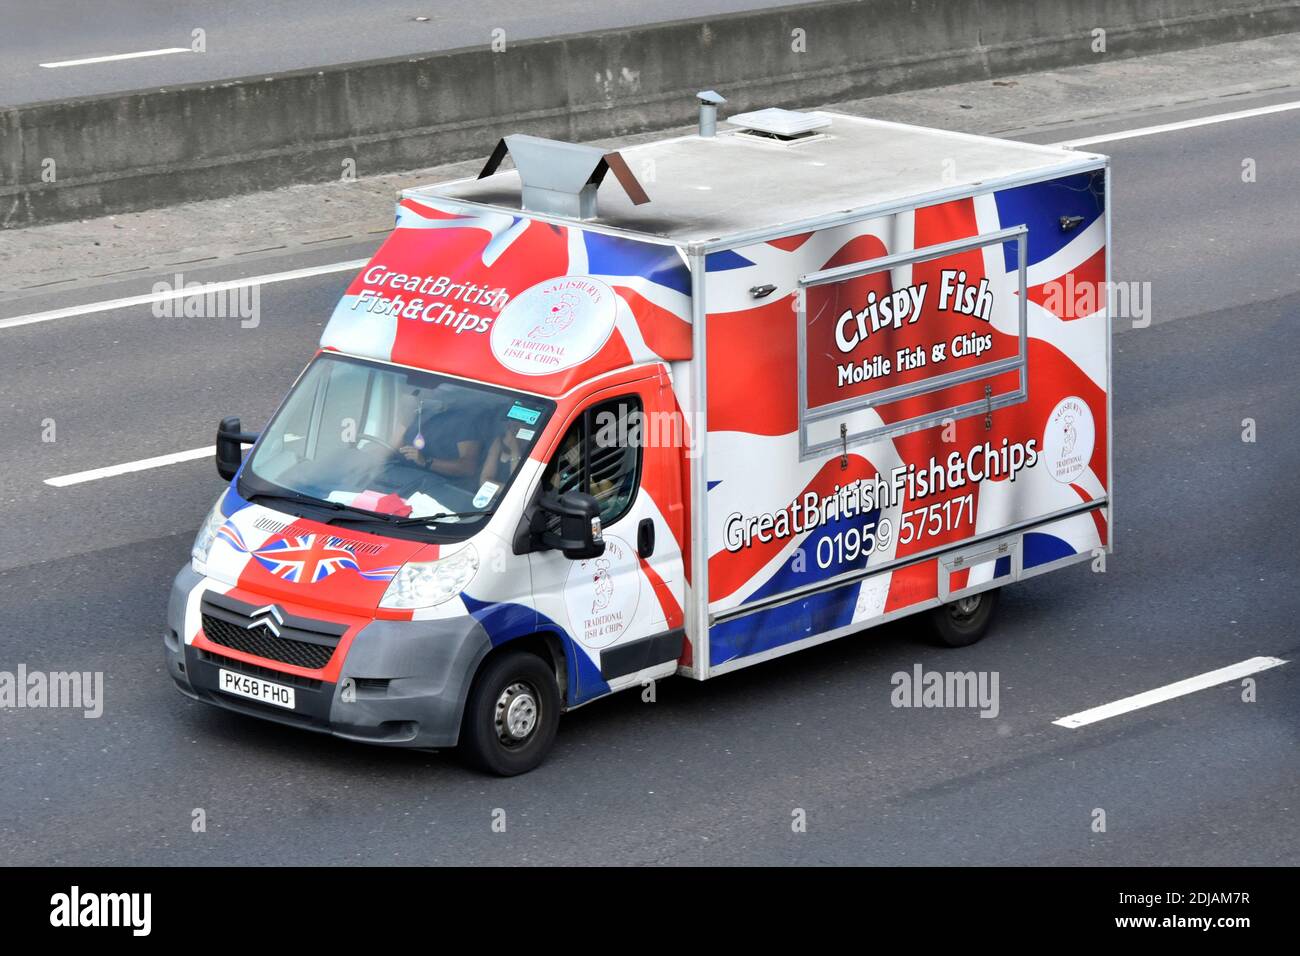 Mobile crispy great British fish and chips with colourful union jack graphics design on side of Citreon van & driver driving along UK motorway road Stock Photo